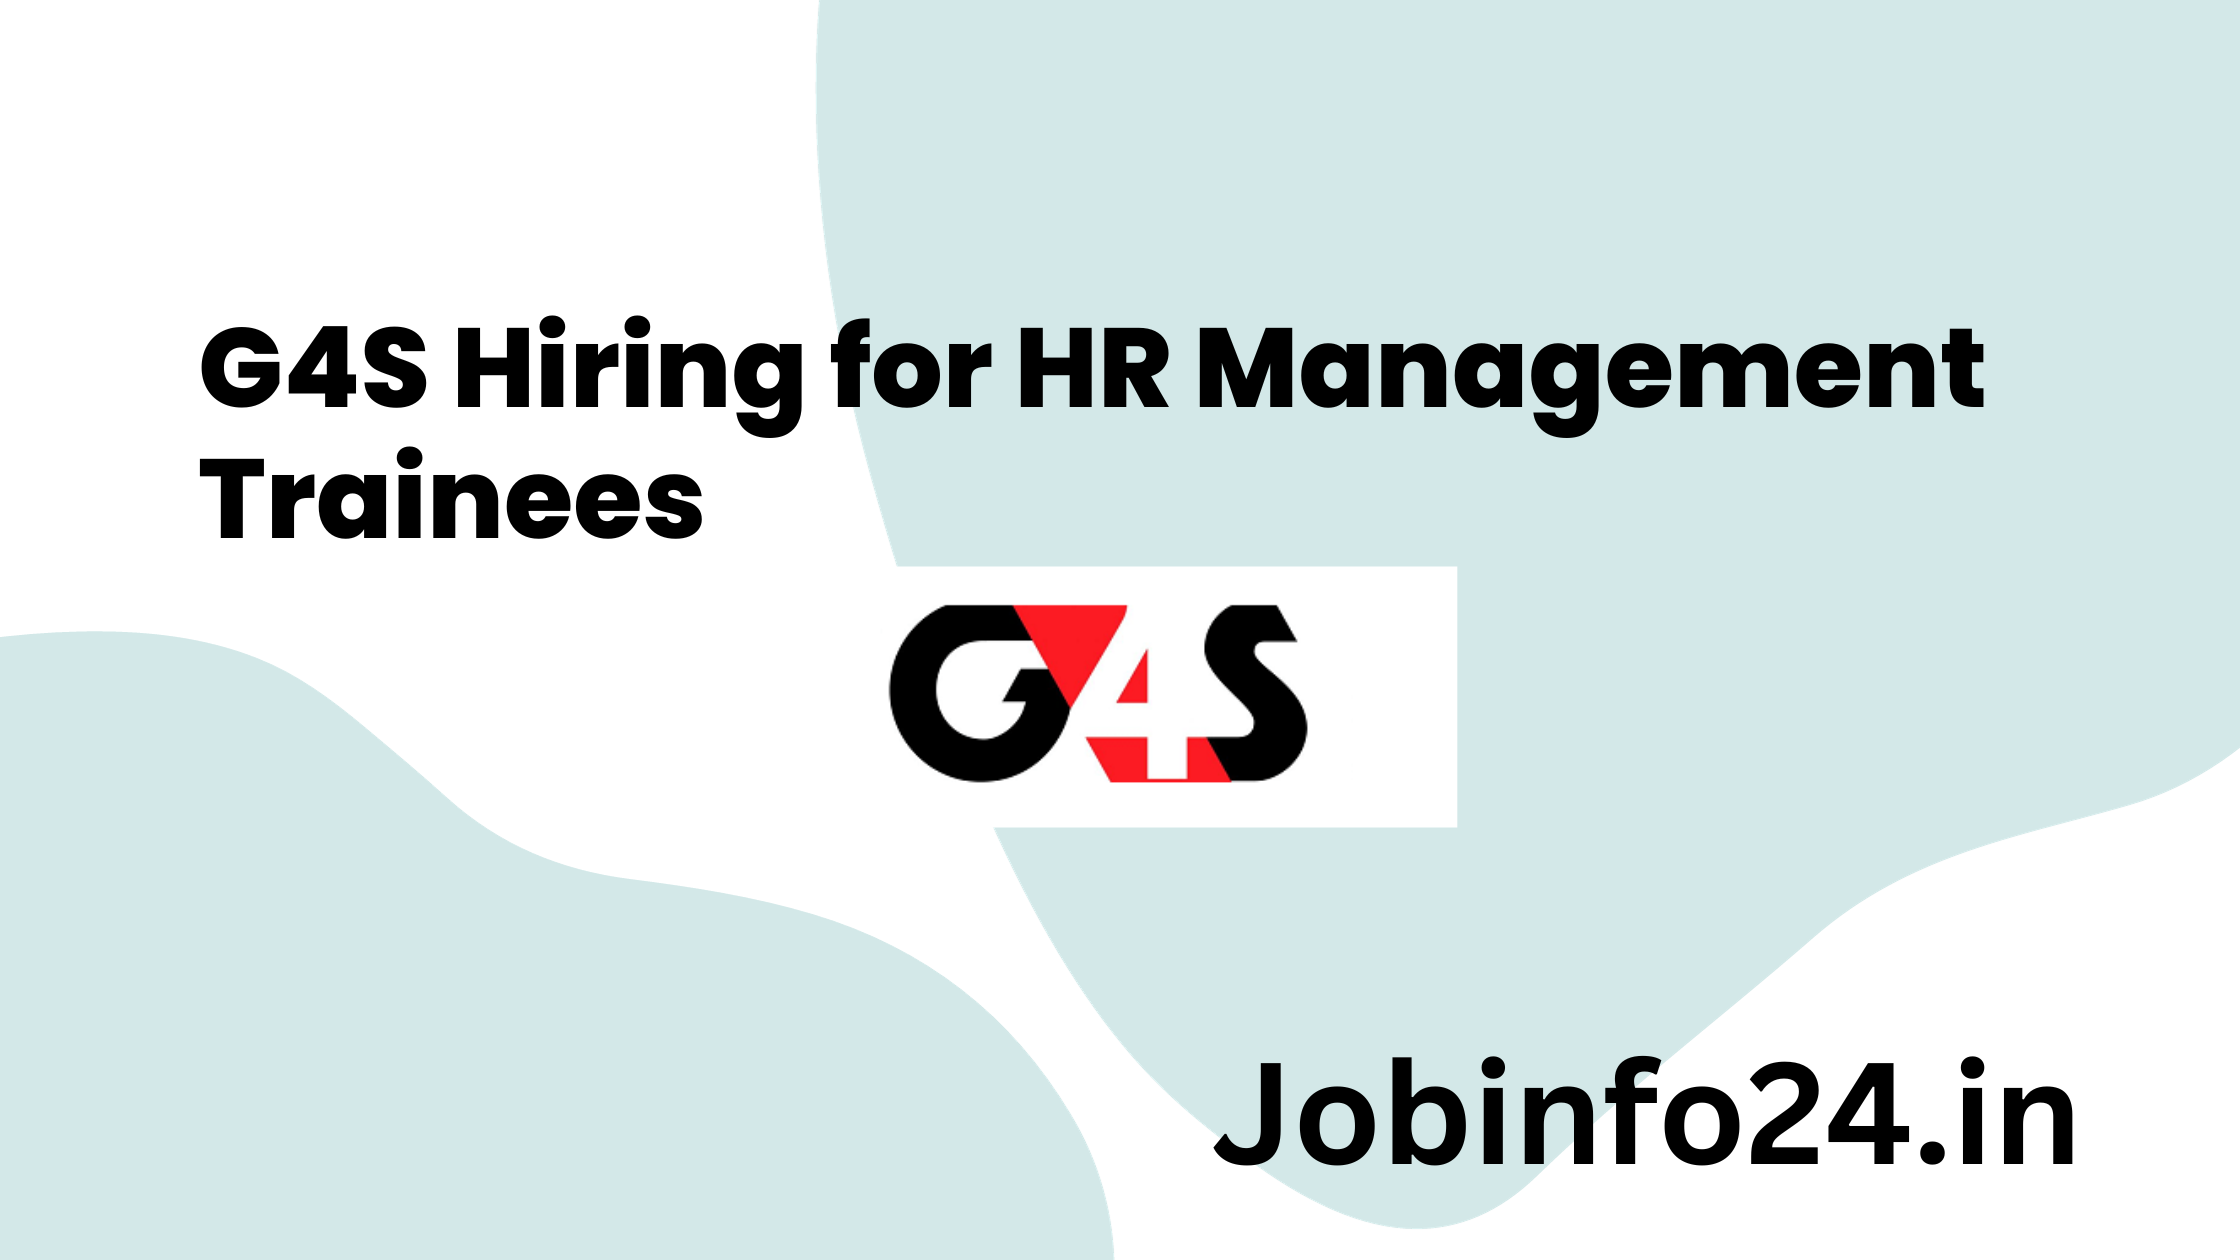 G4S Hiring for HR Management Trainees